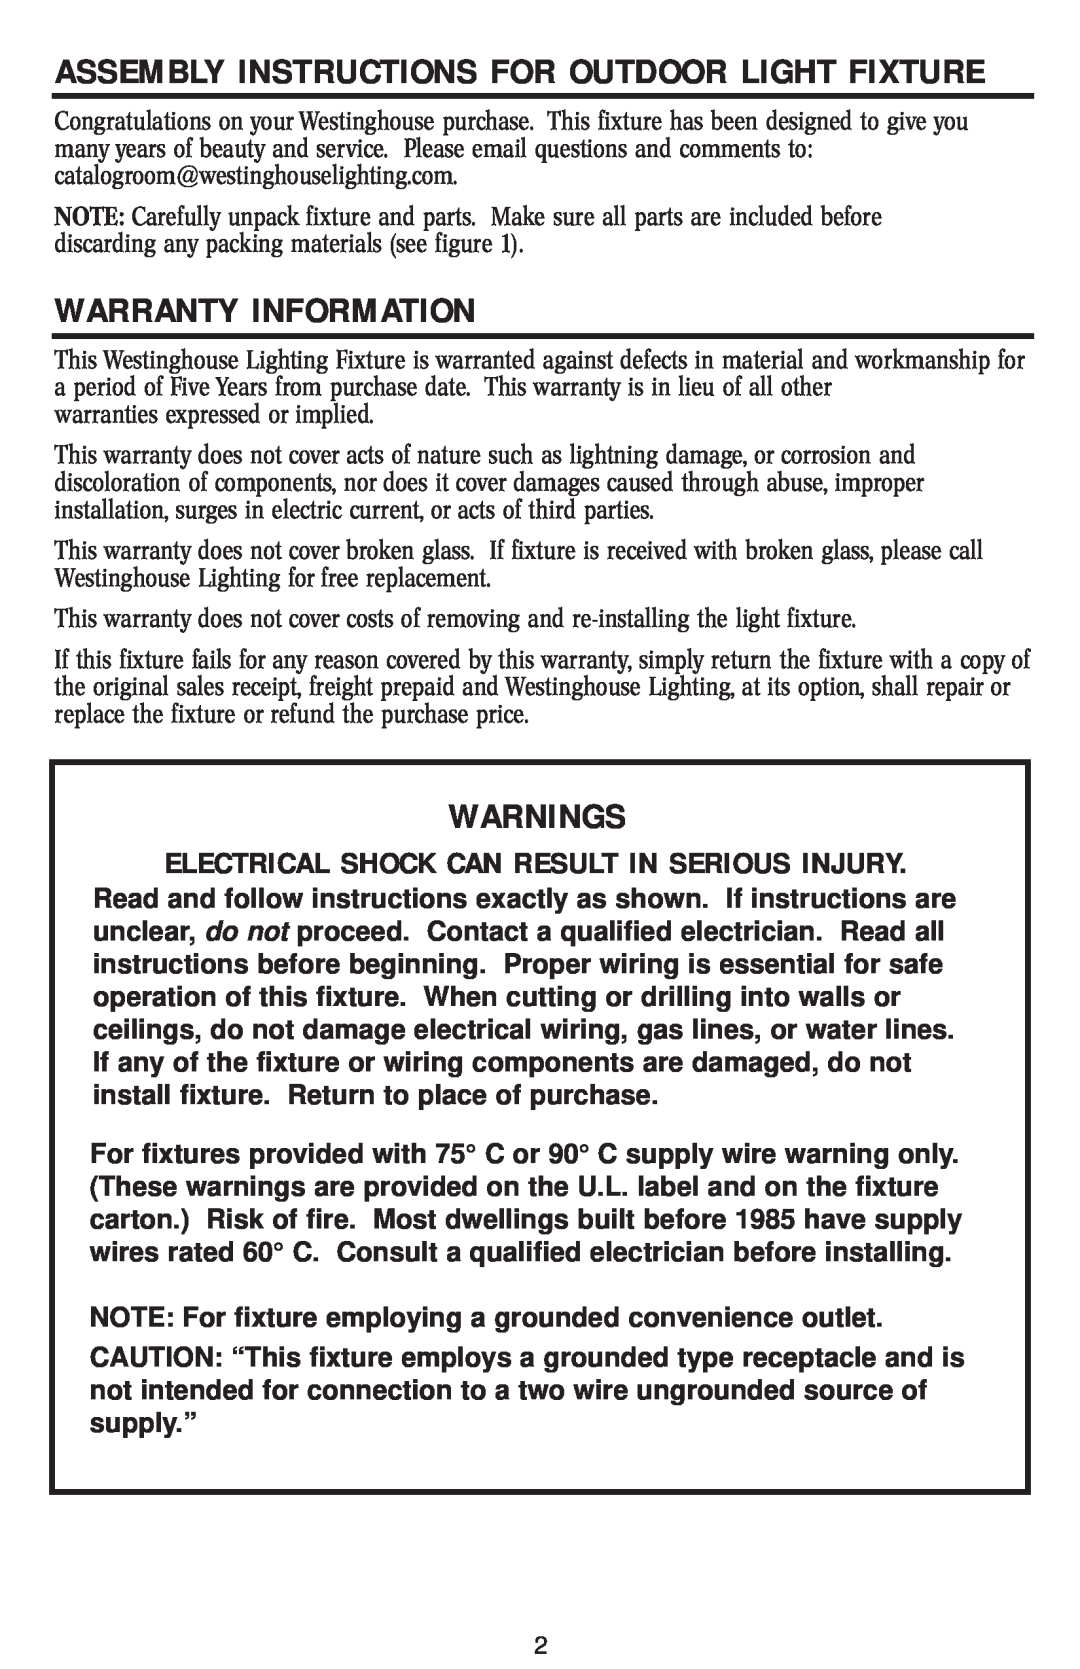 Westinghouse W-015 owner manual Warranty Information, Warnings, Assembly Instructions For Outdoor Light Fixture 